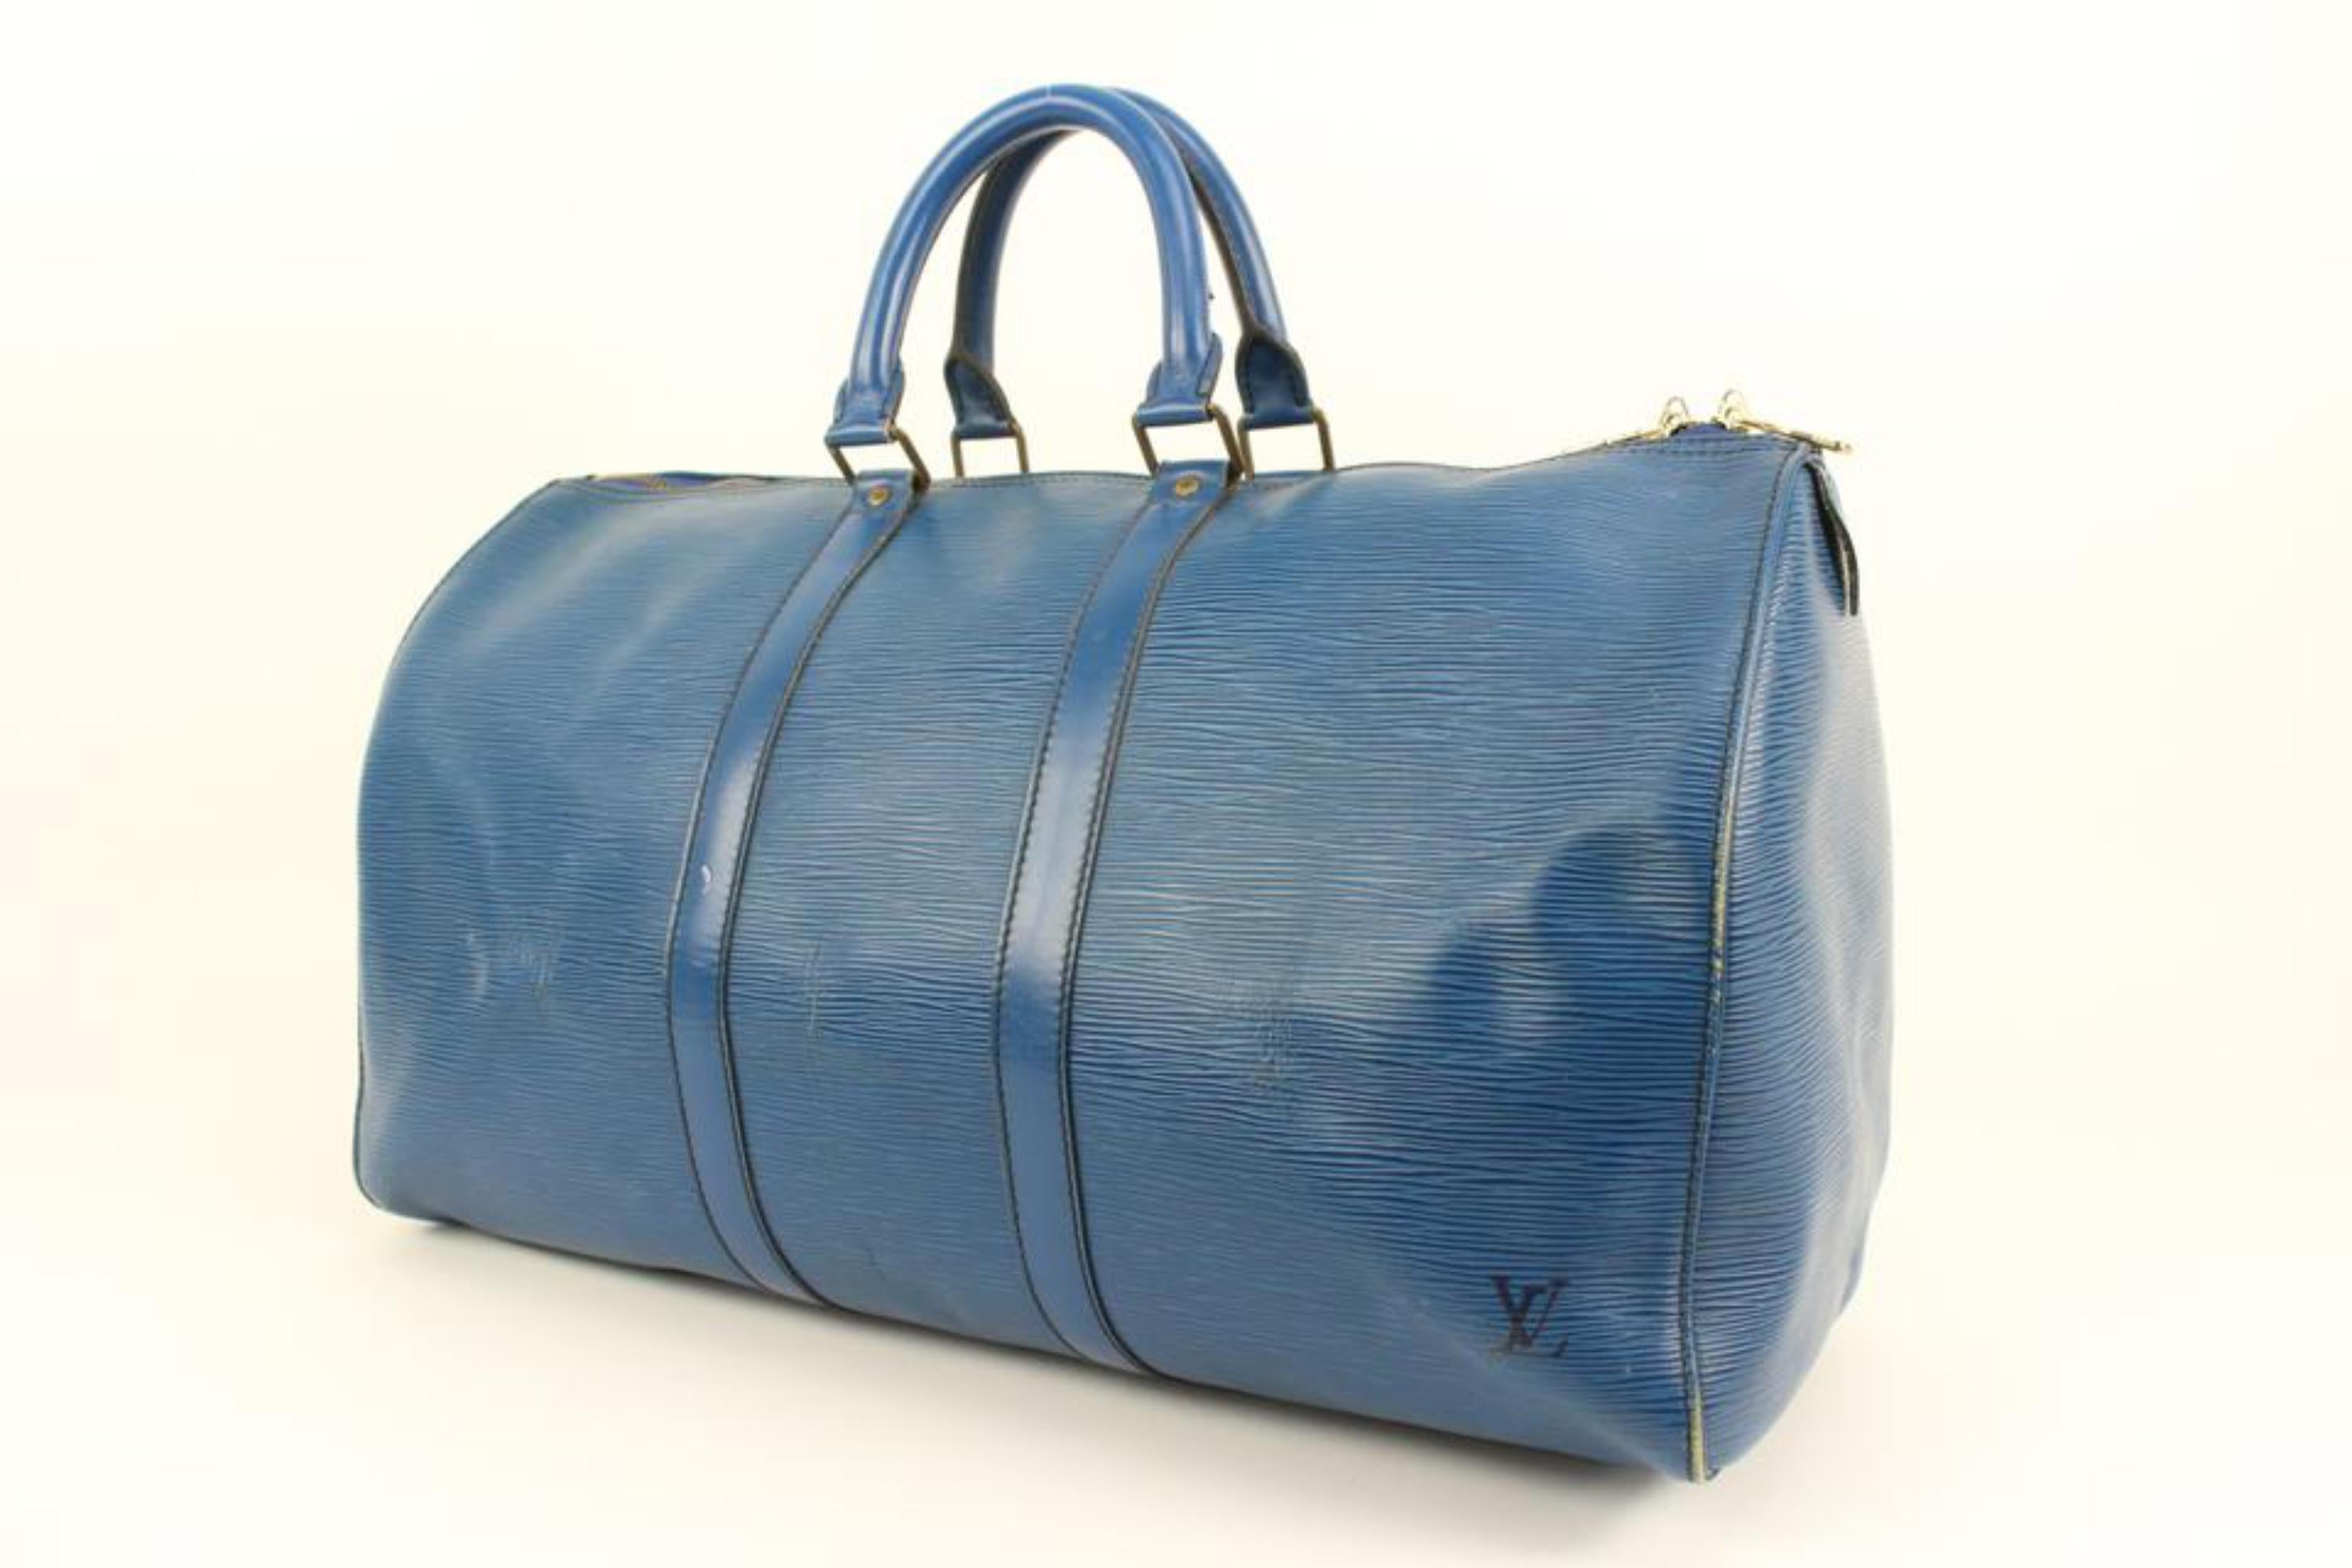 Louis Vuitton Blue Toledo Epi Leather Keepall 45 Duffle Bag 80lk411s
Date Code/Serial Number: VI1921
Made In: France
Measurements: Length:  18